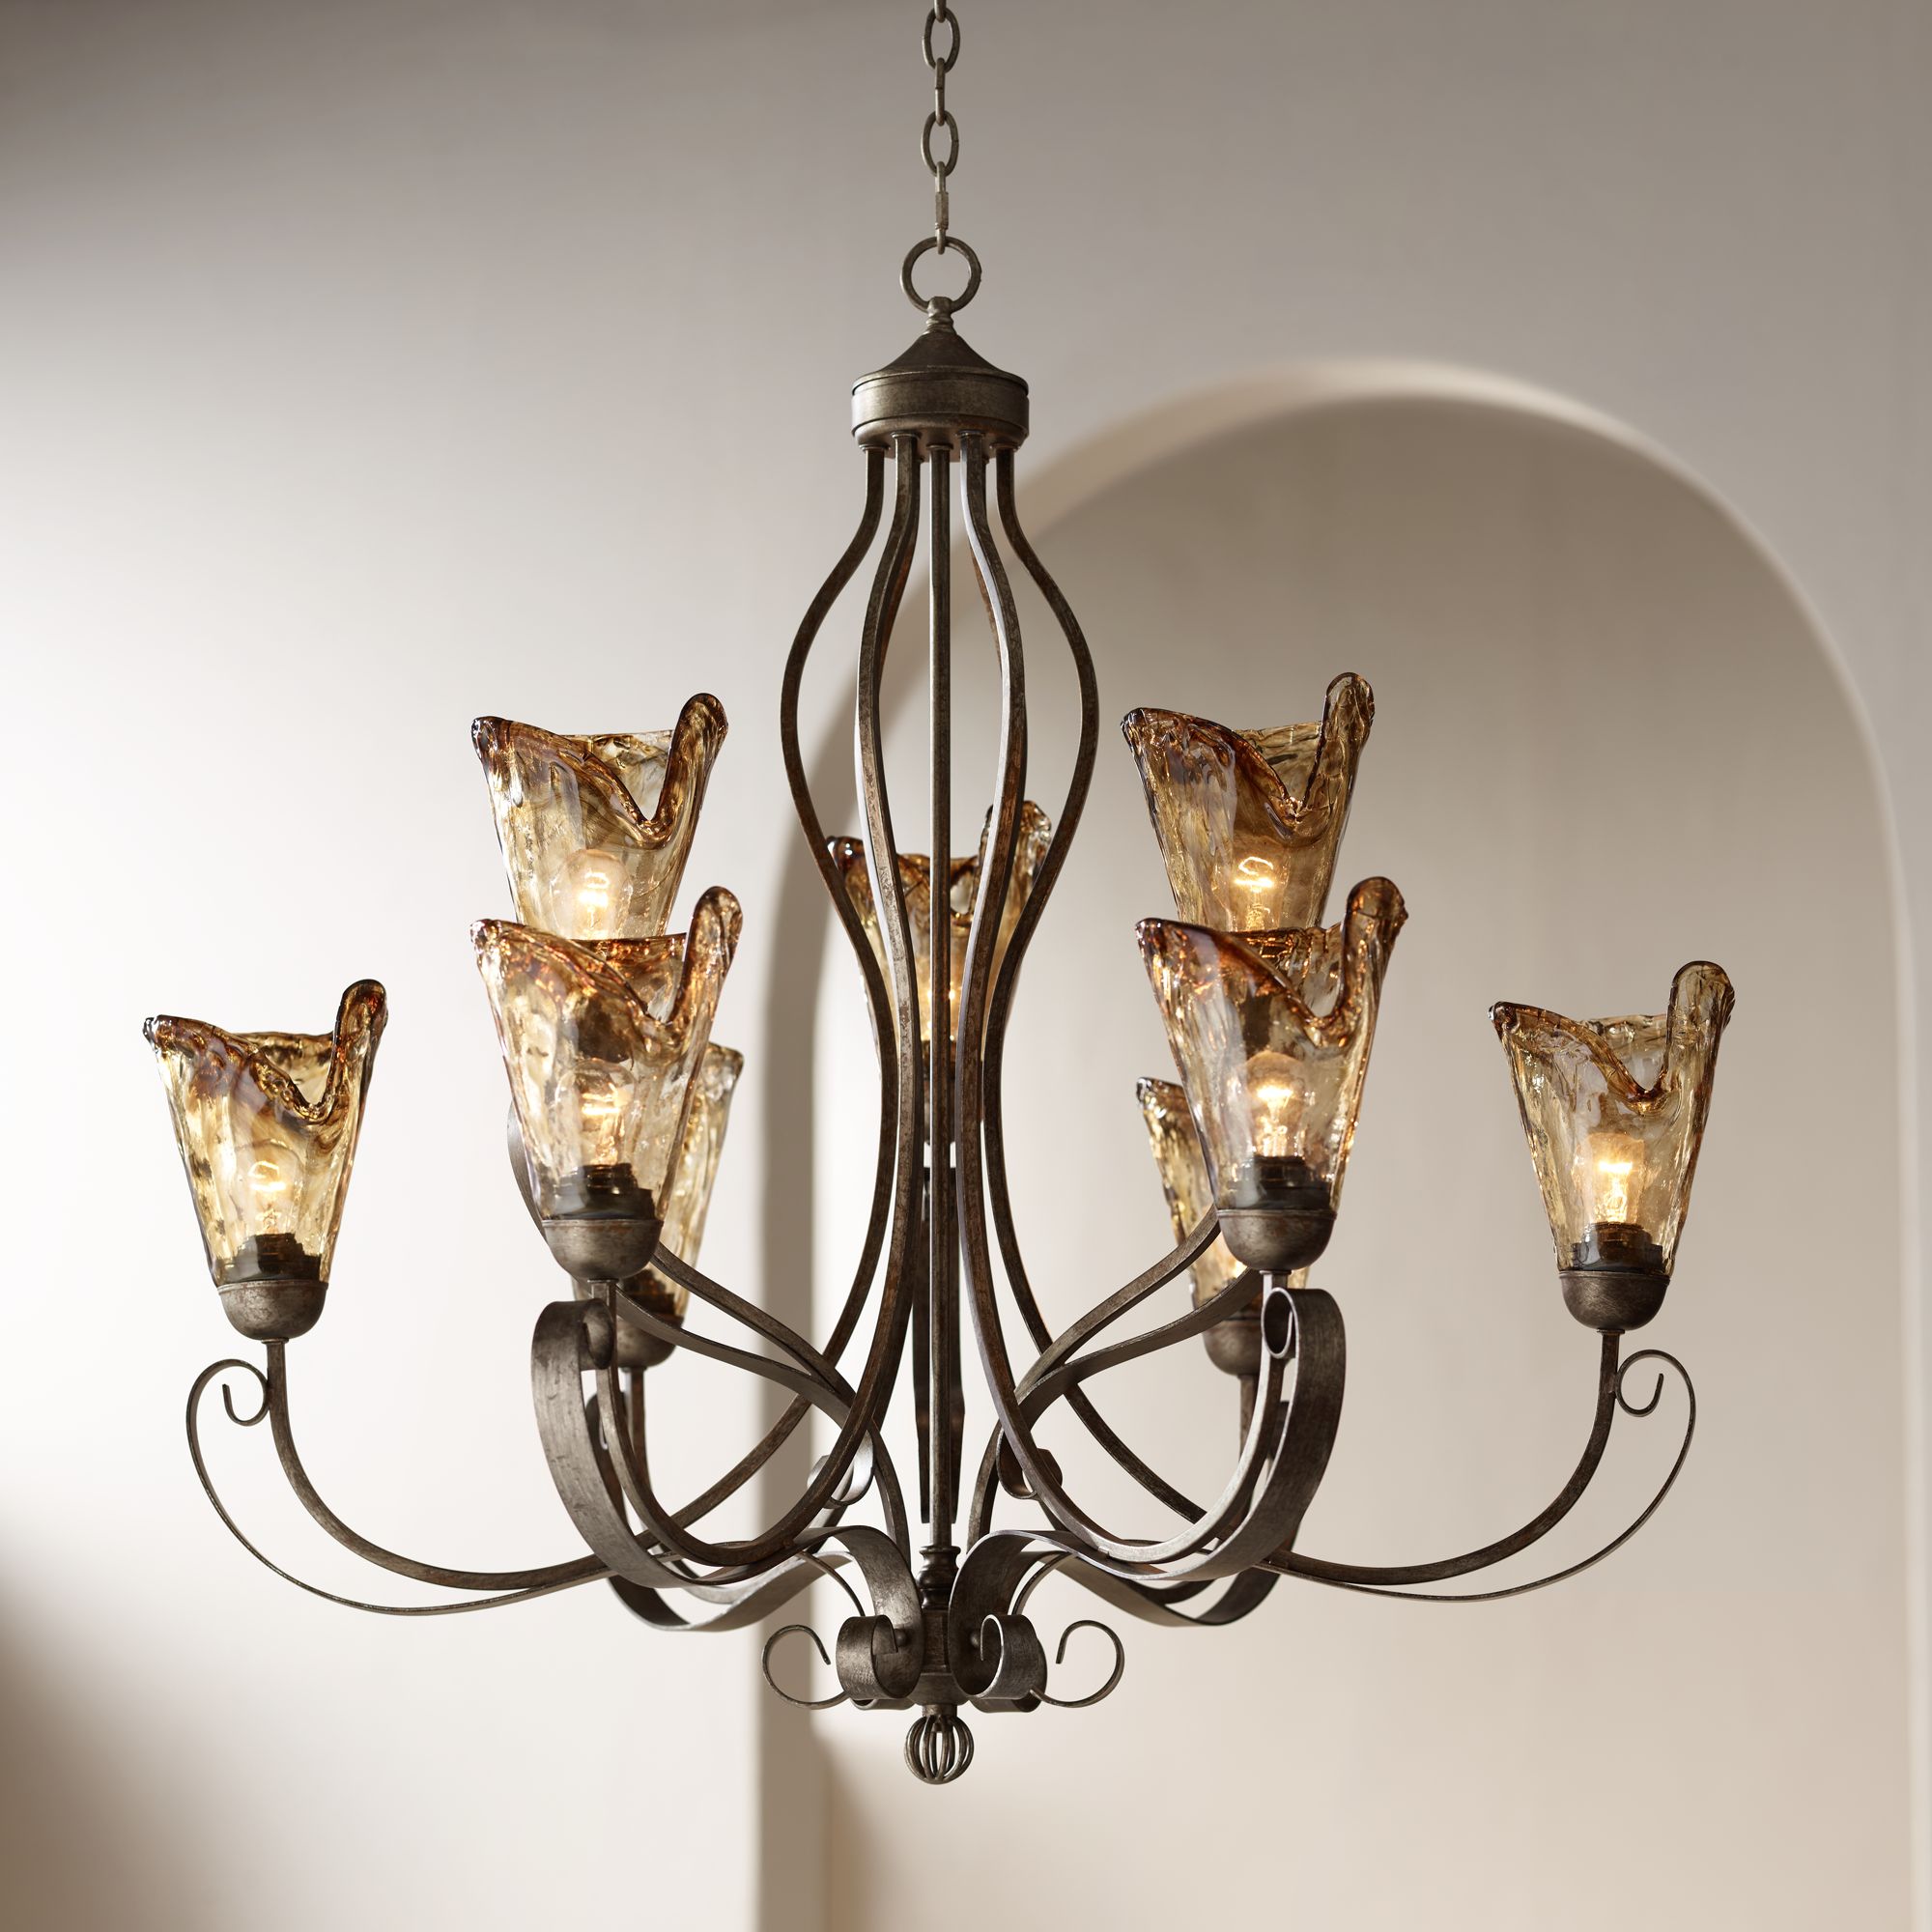 Chandelier lighting collections